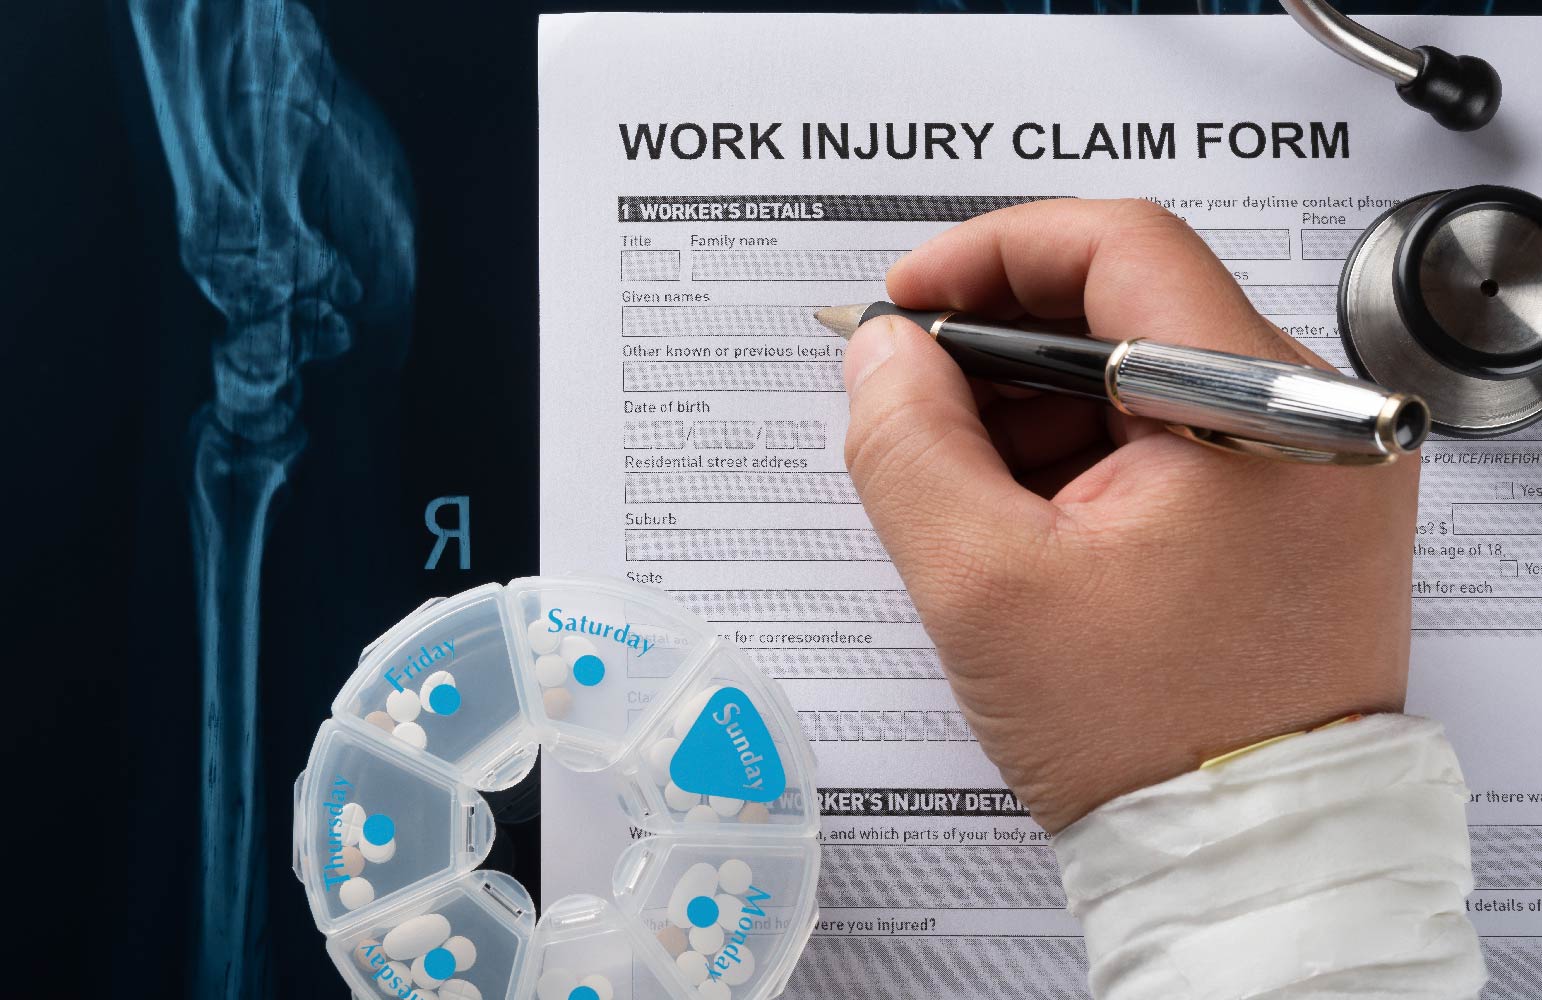 Reporting a Work Injury